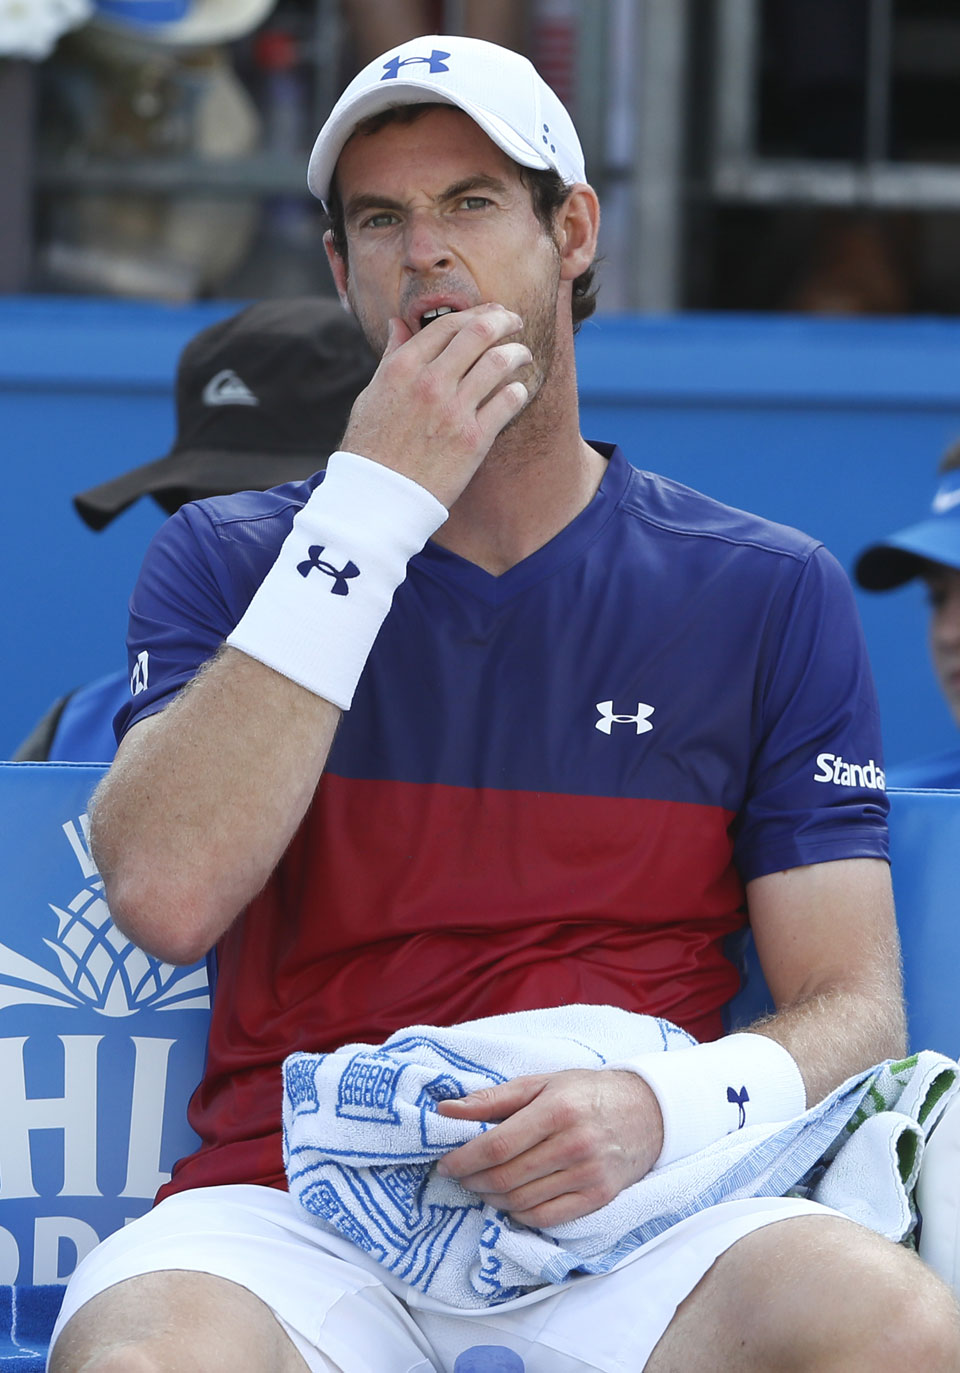 Murray out on day of 1st-round shocks at Queen's